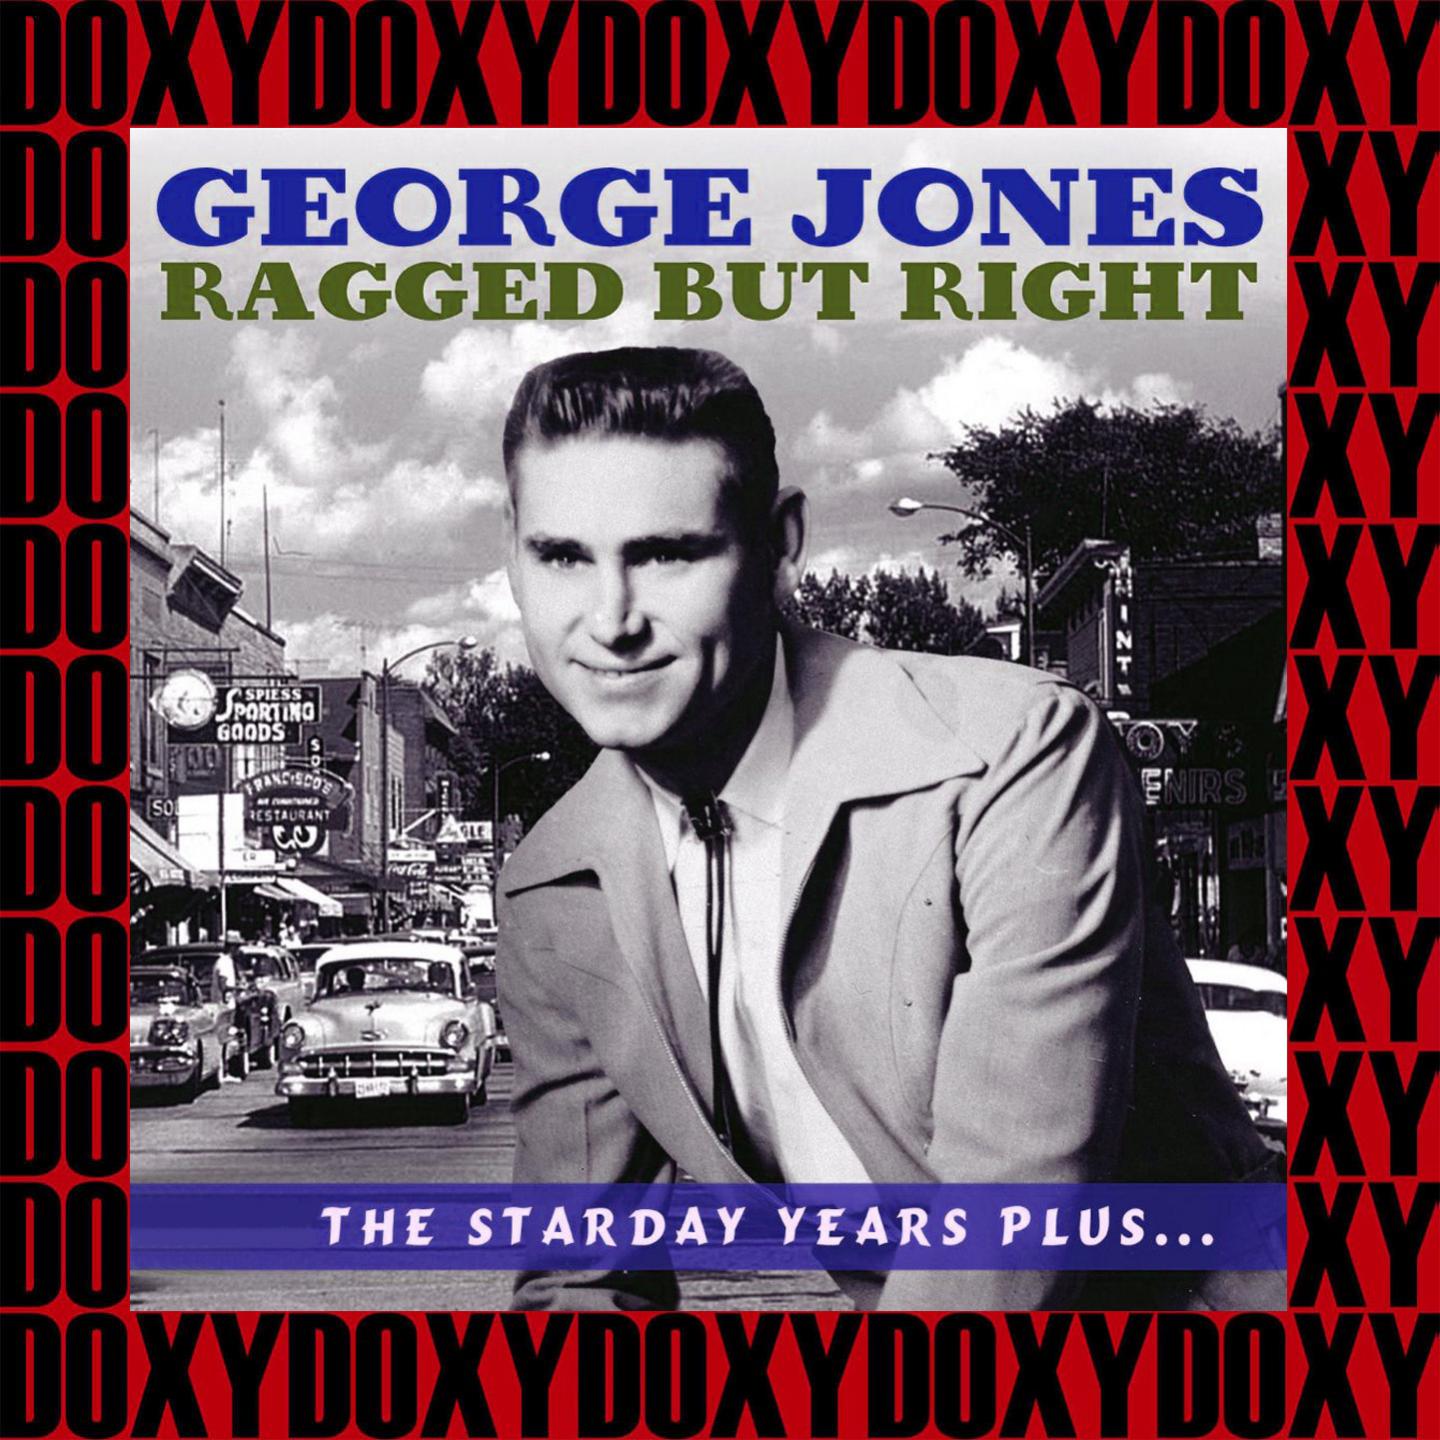 Ragged But Right: The Starday Years Plus..., Vol.2 (Remastered Version) (Doxy Collection)